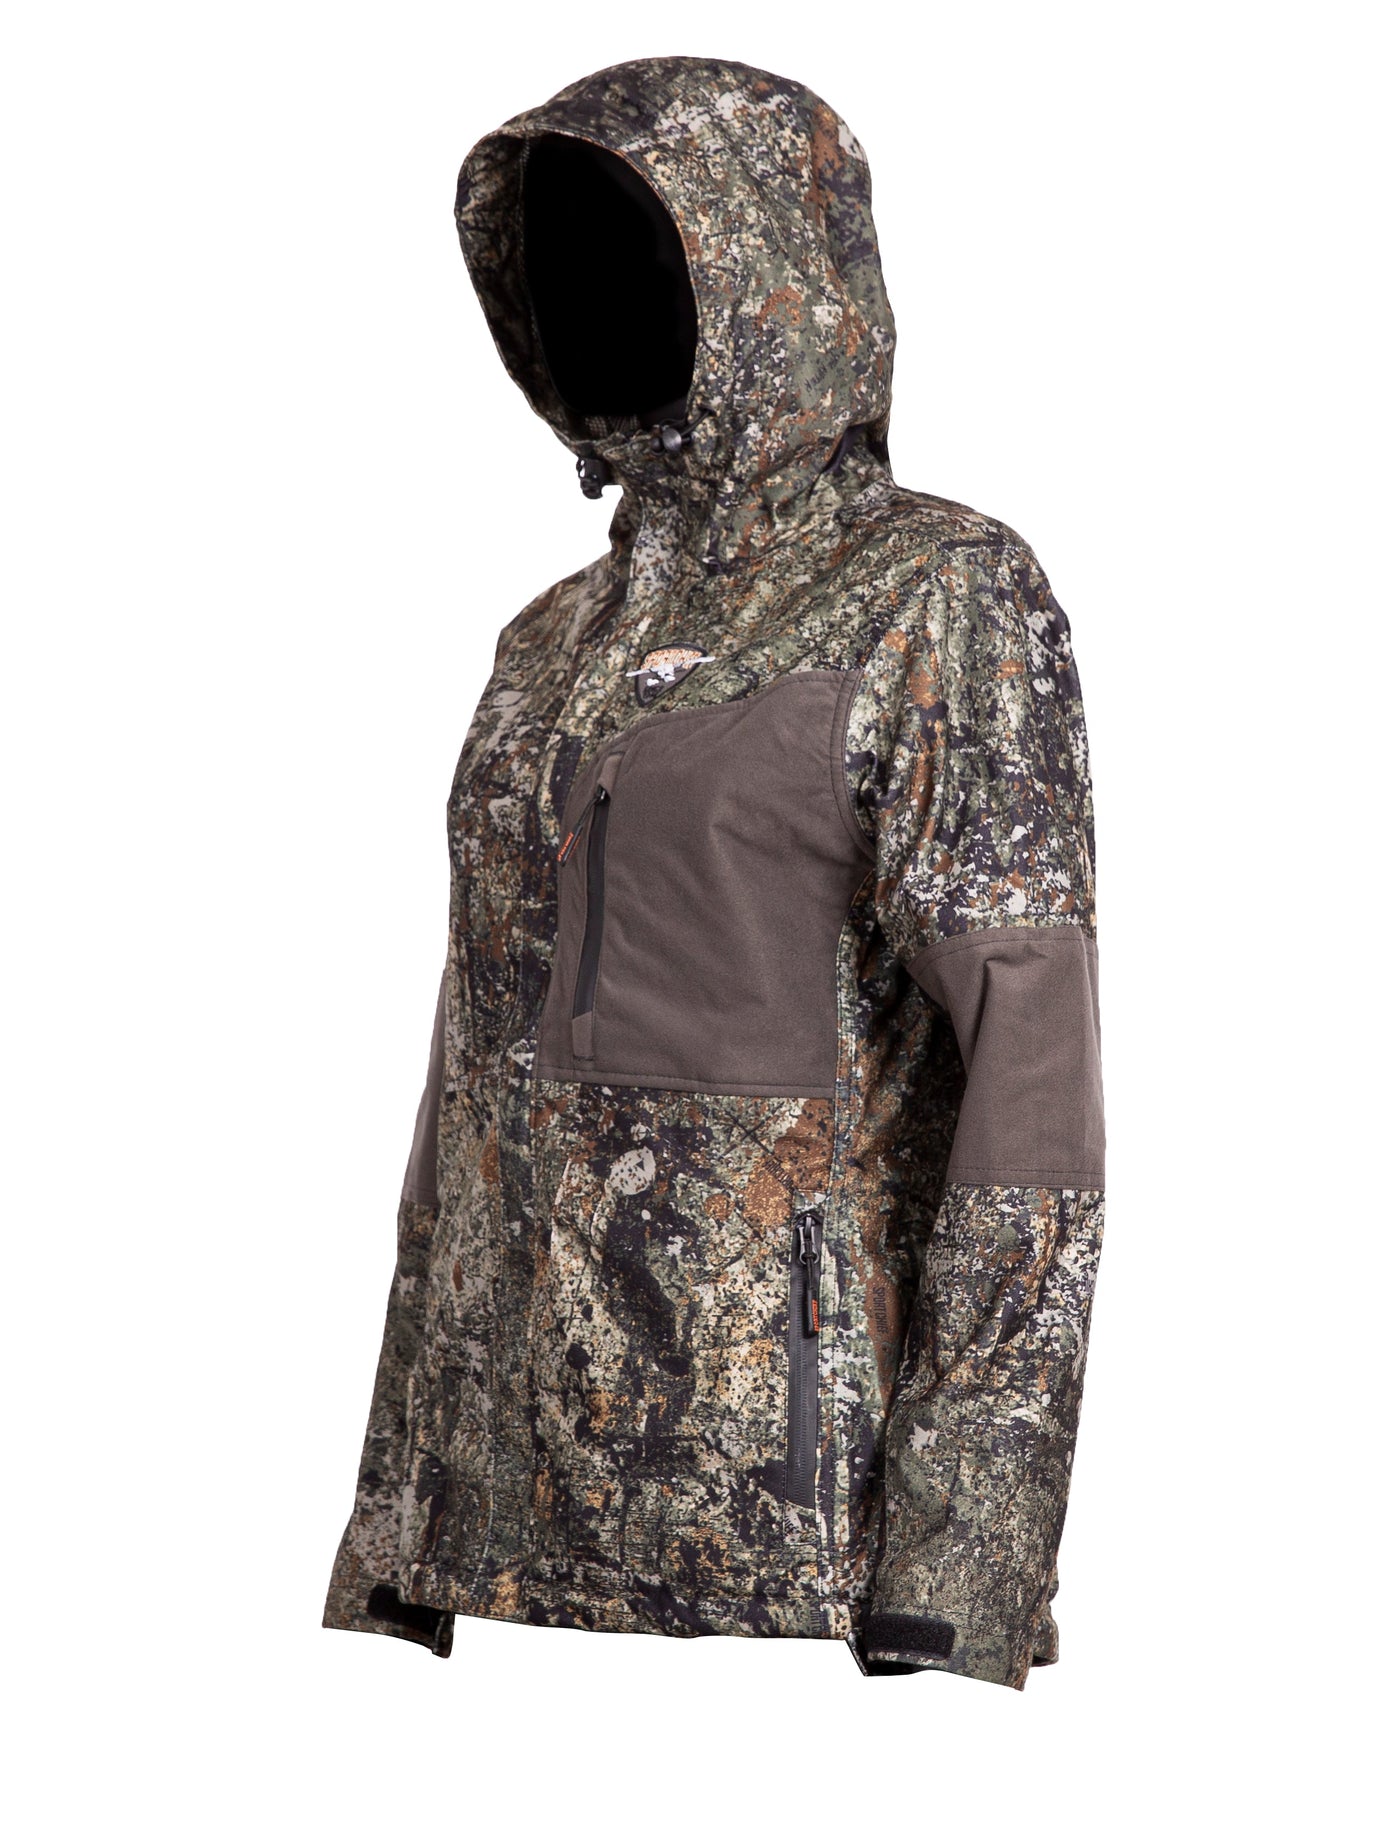 Sportchief Women's "Express 2.0" Hunting Jacket